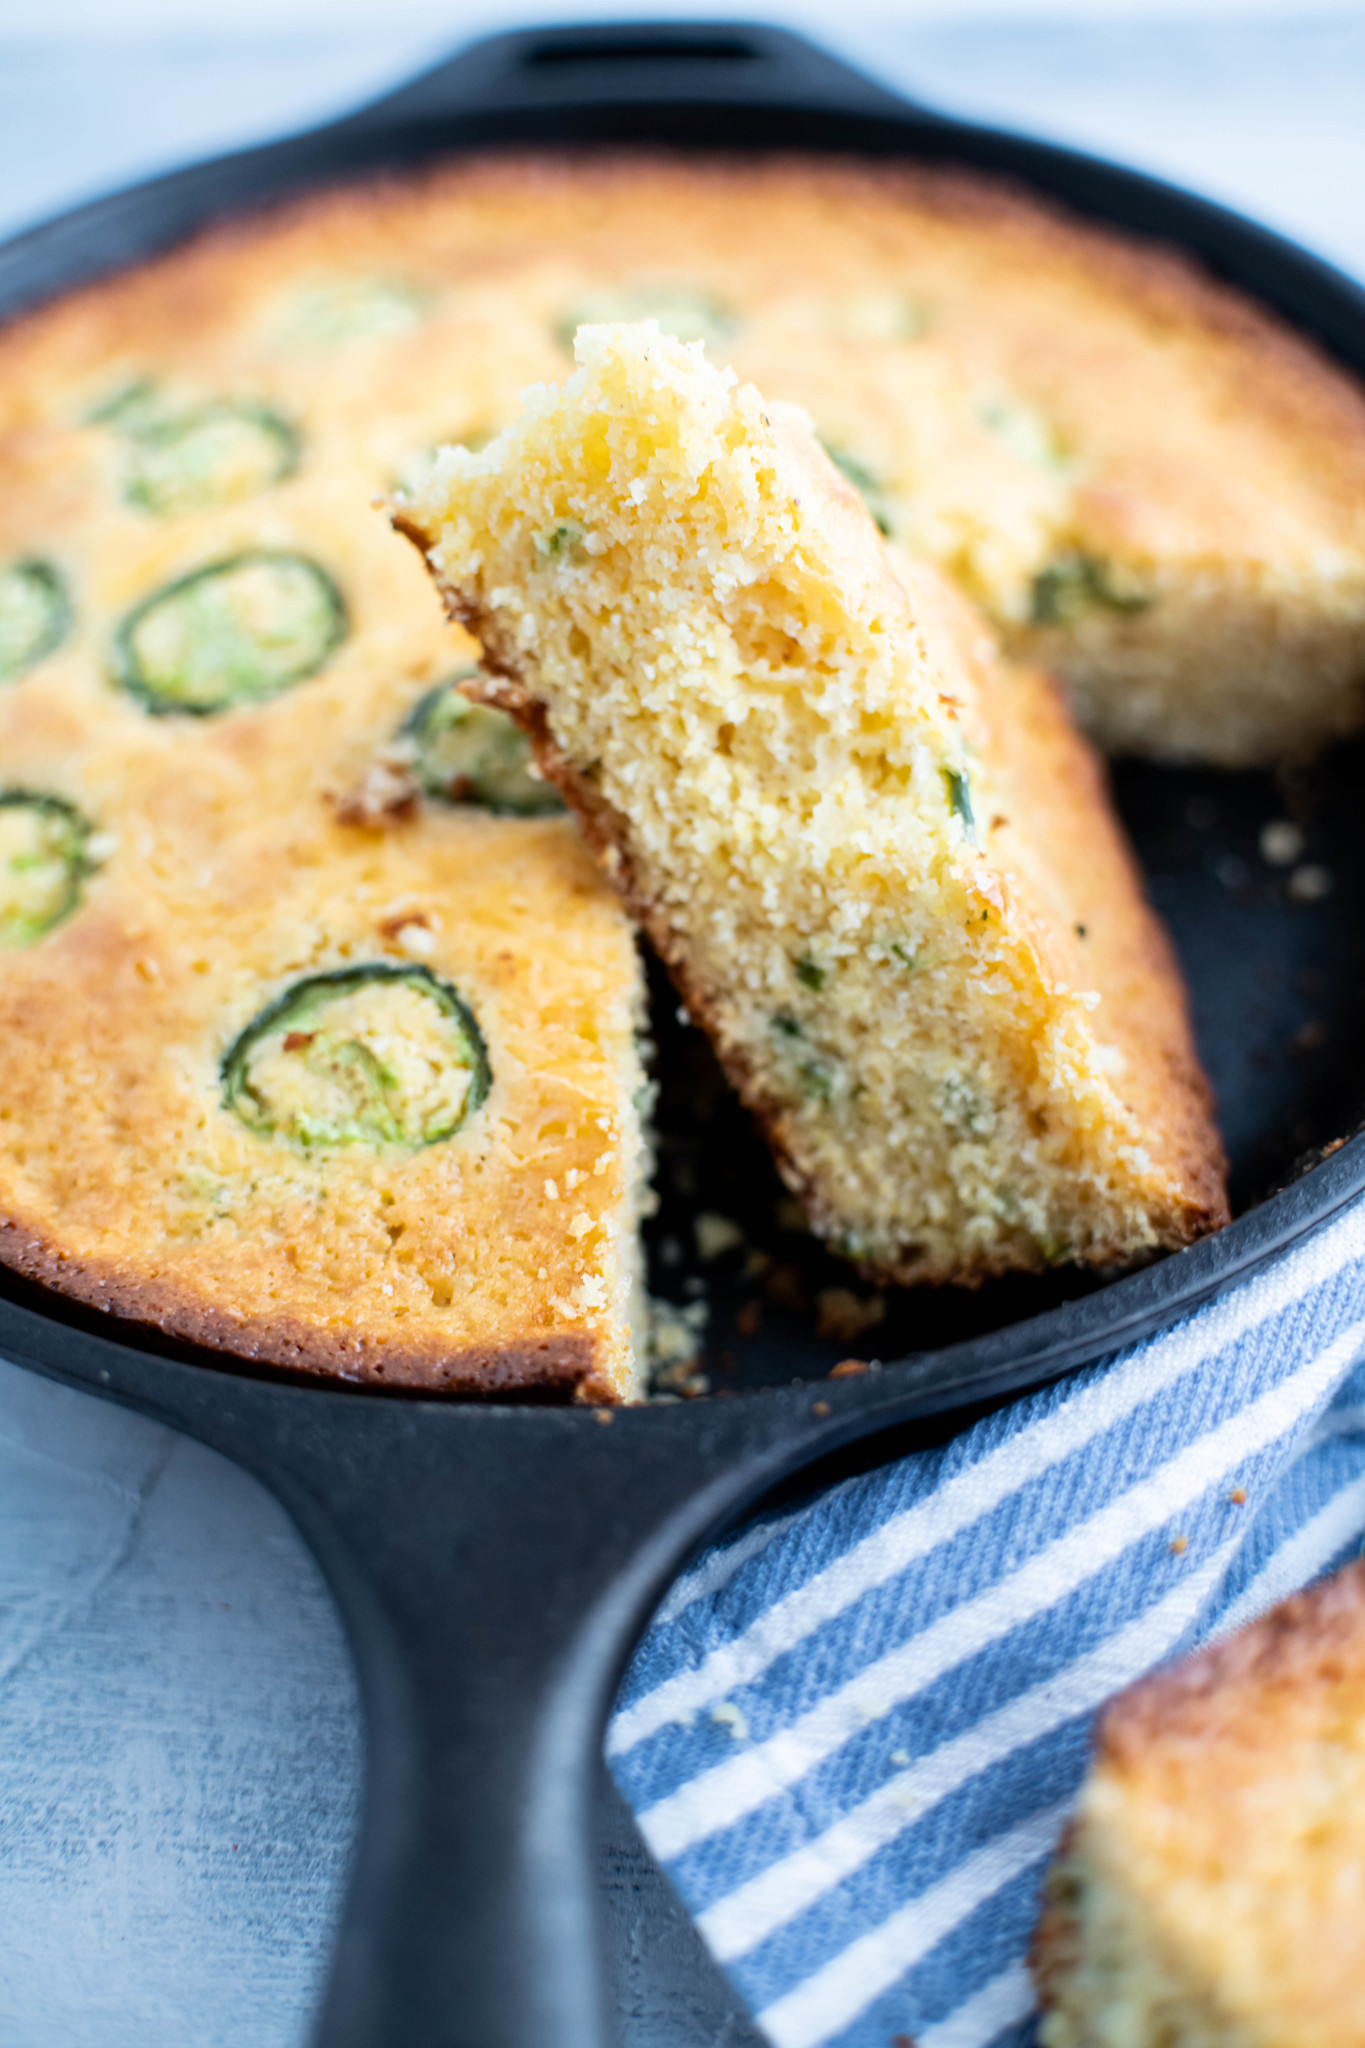 Slice of jalapeno cornbread turned on its side in the cast iron skillet.